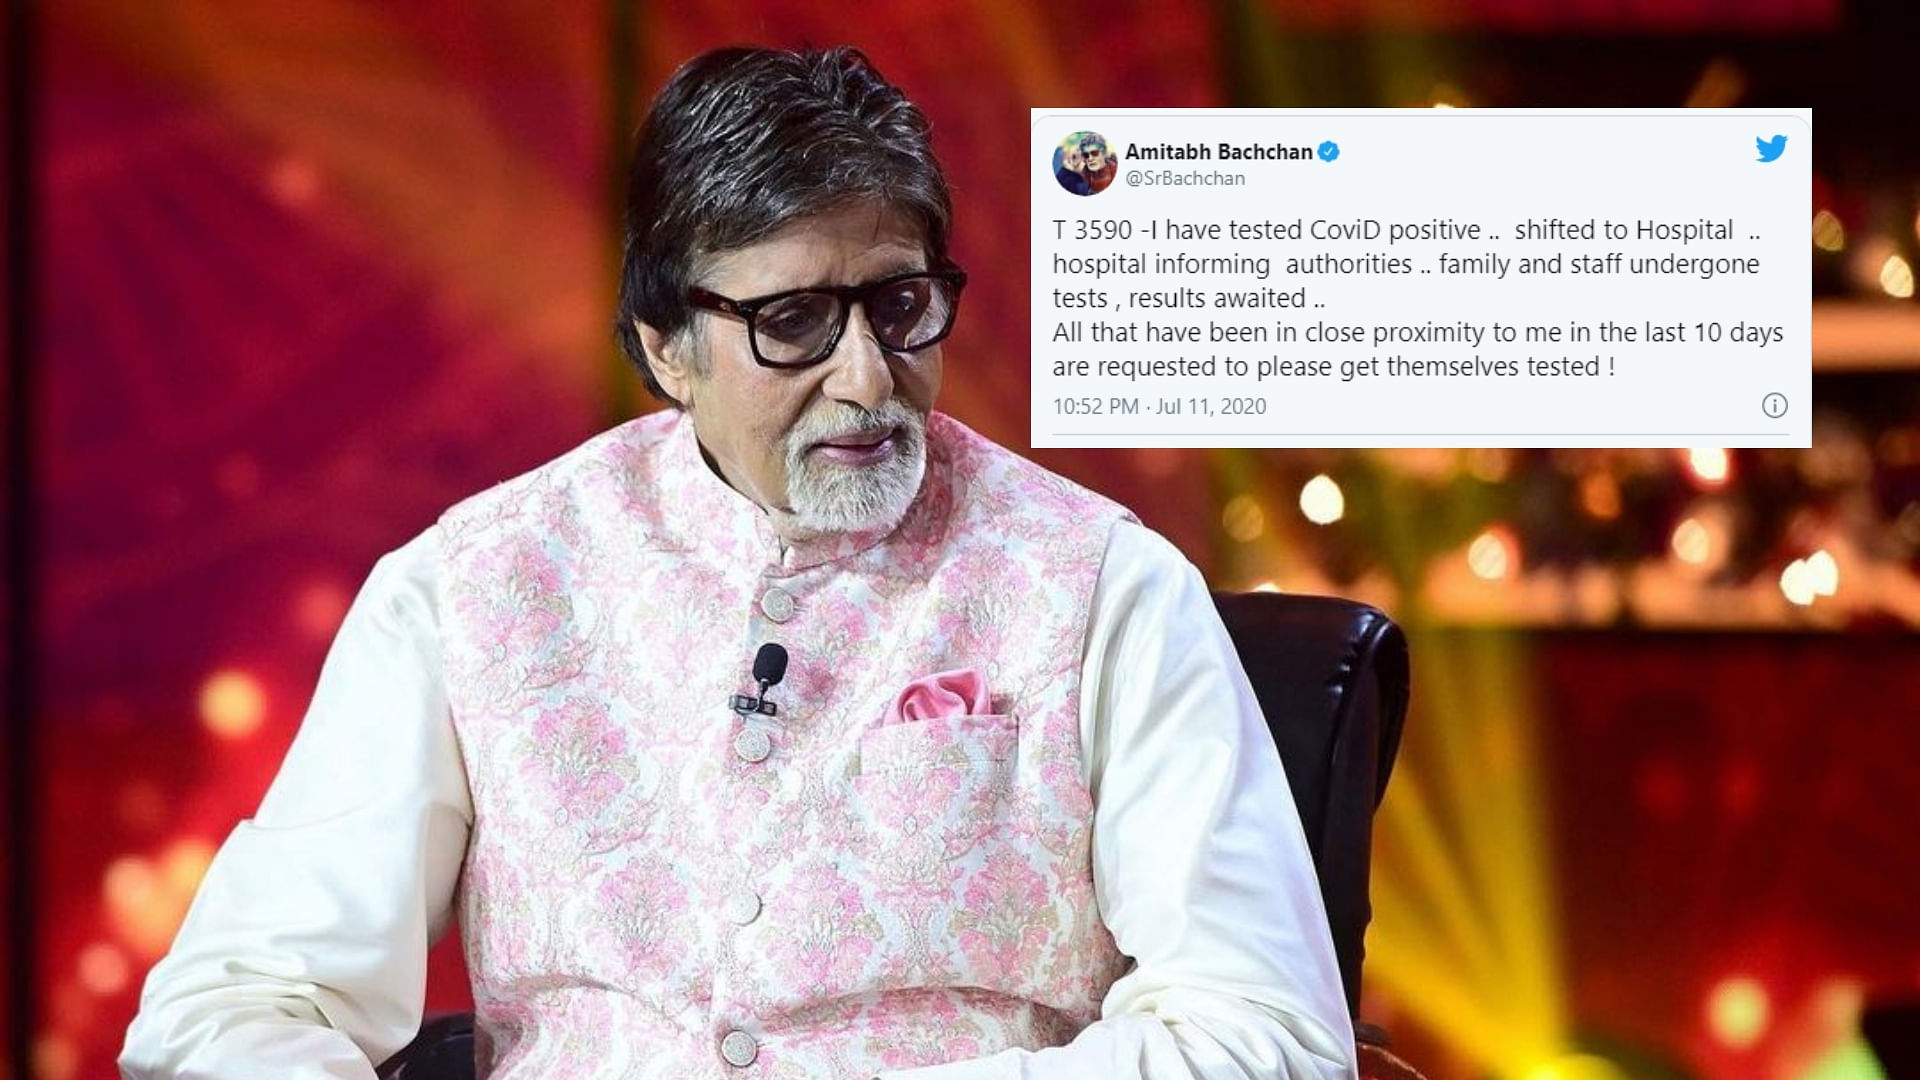 Amitabh Bachchan's tweet announcing he had tested positive for COVID-19 was the most liked and quoted tweet in Indian entertainment of 2020, says Twitter India.